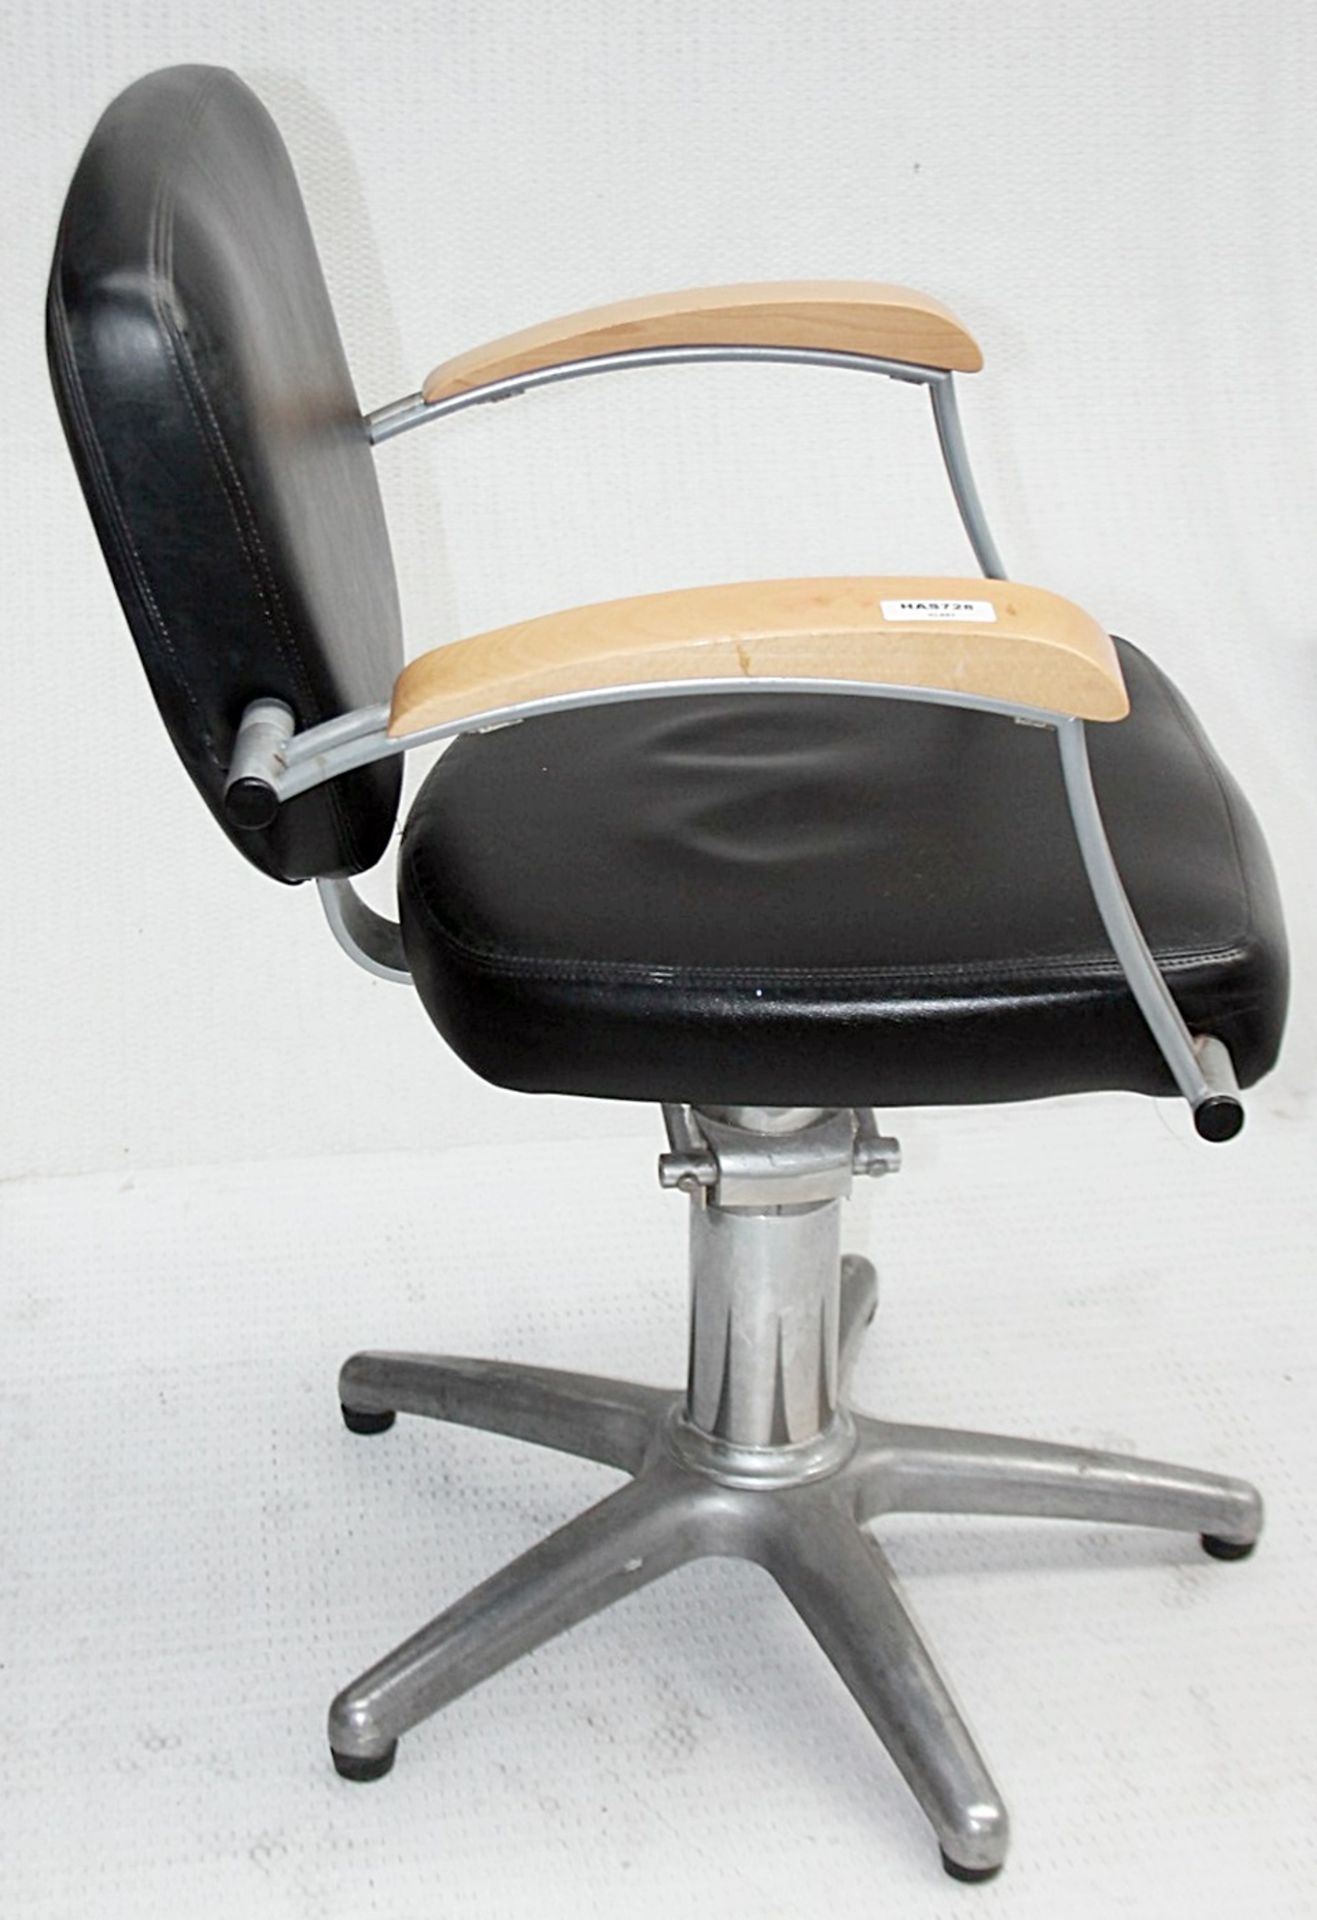 1 x Adjustable Black Hydraulic Barber Hairdressing Chair - Recently Removed From A Boutique Hair - Image 8 of 10